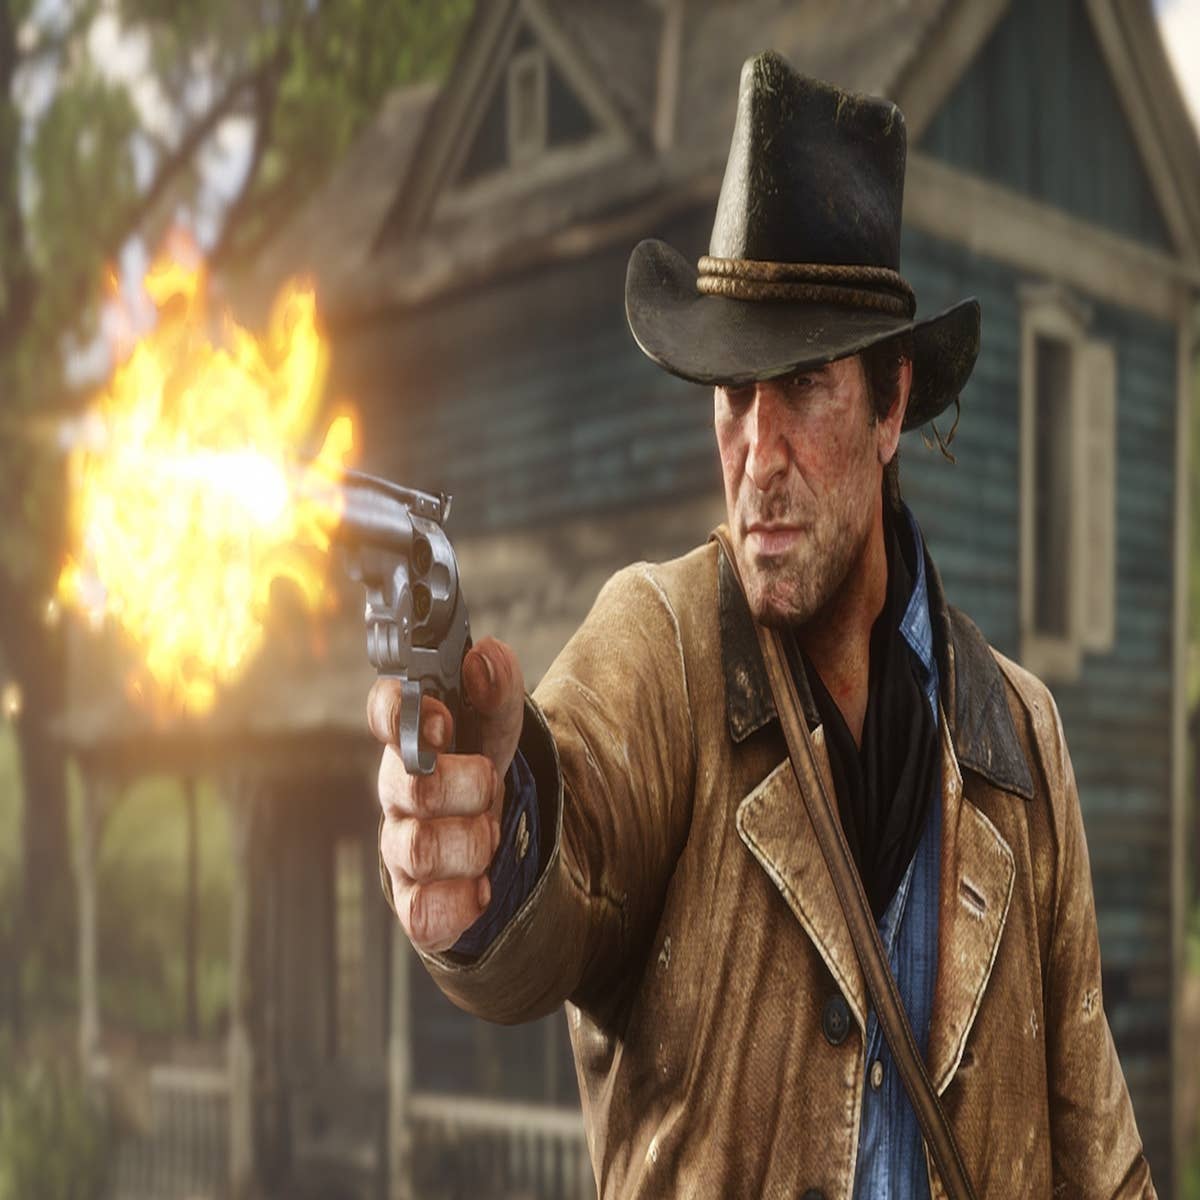 How to buy Red Dead Redemption 2 - CNET